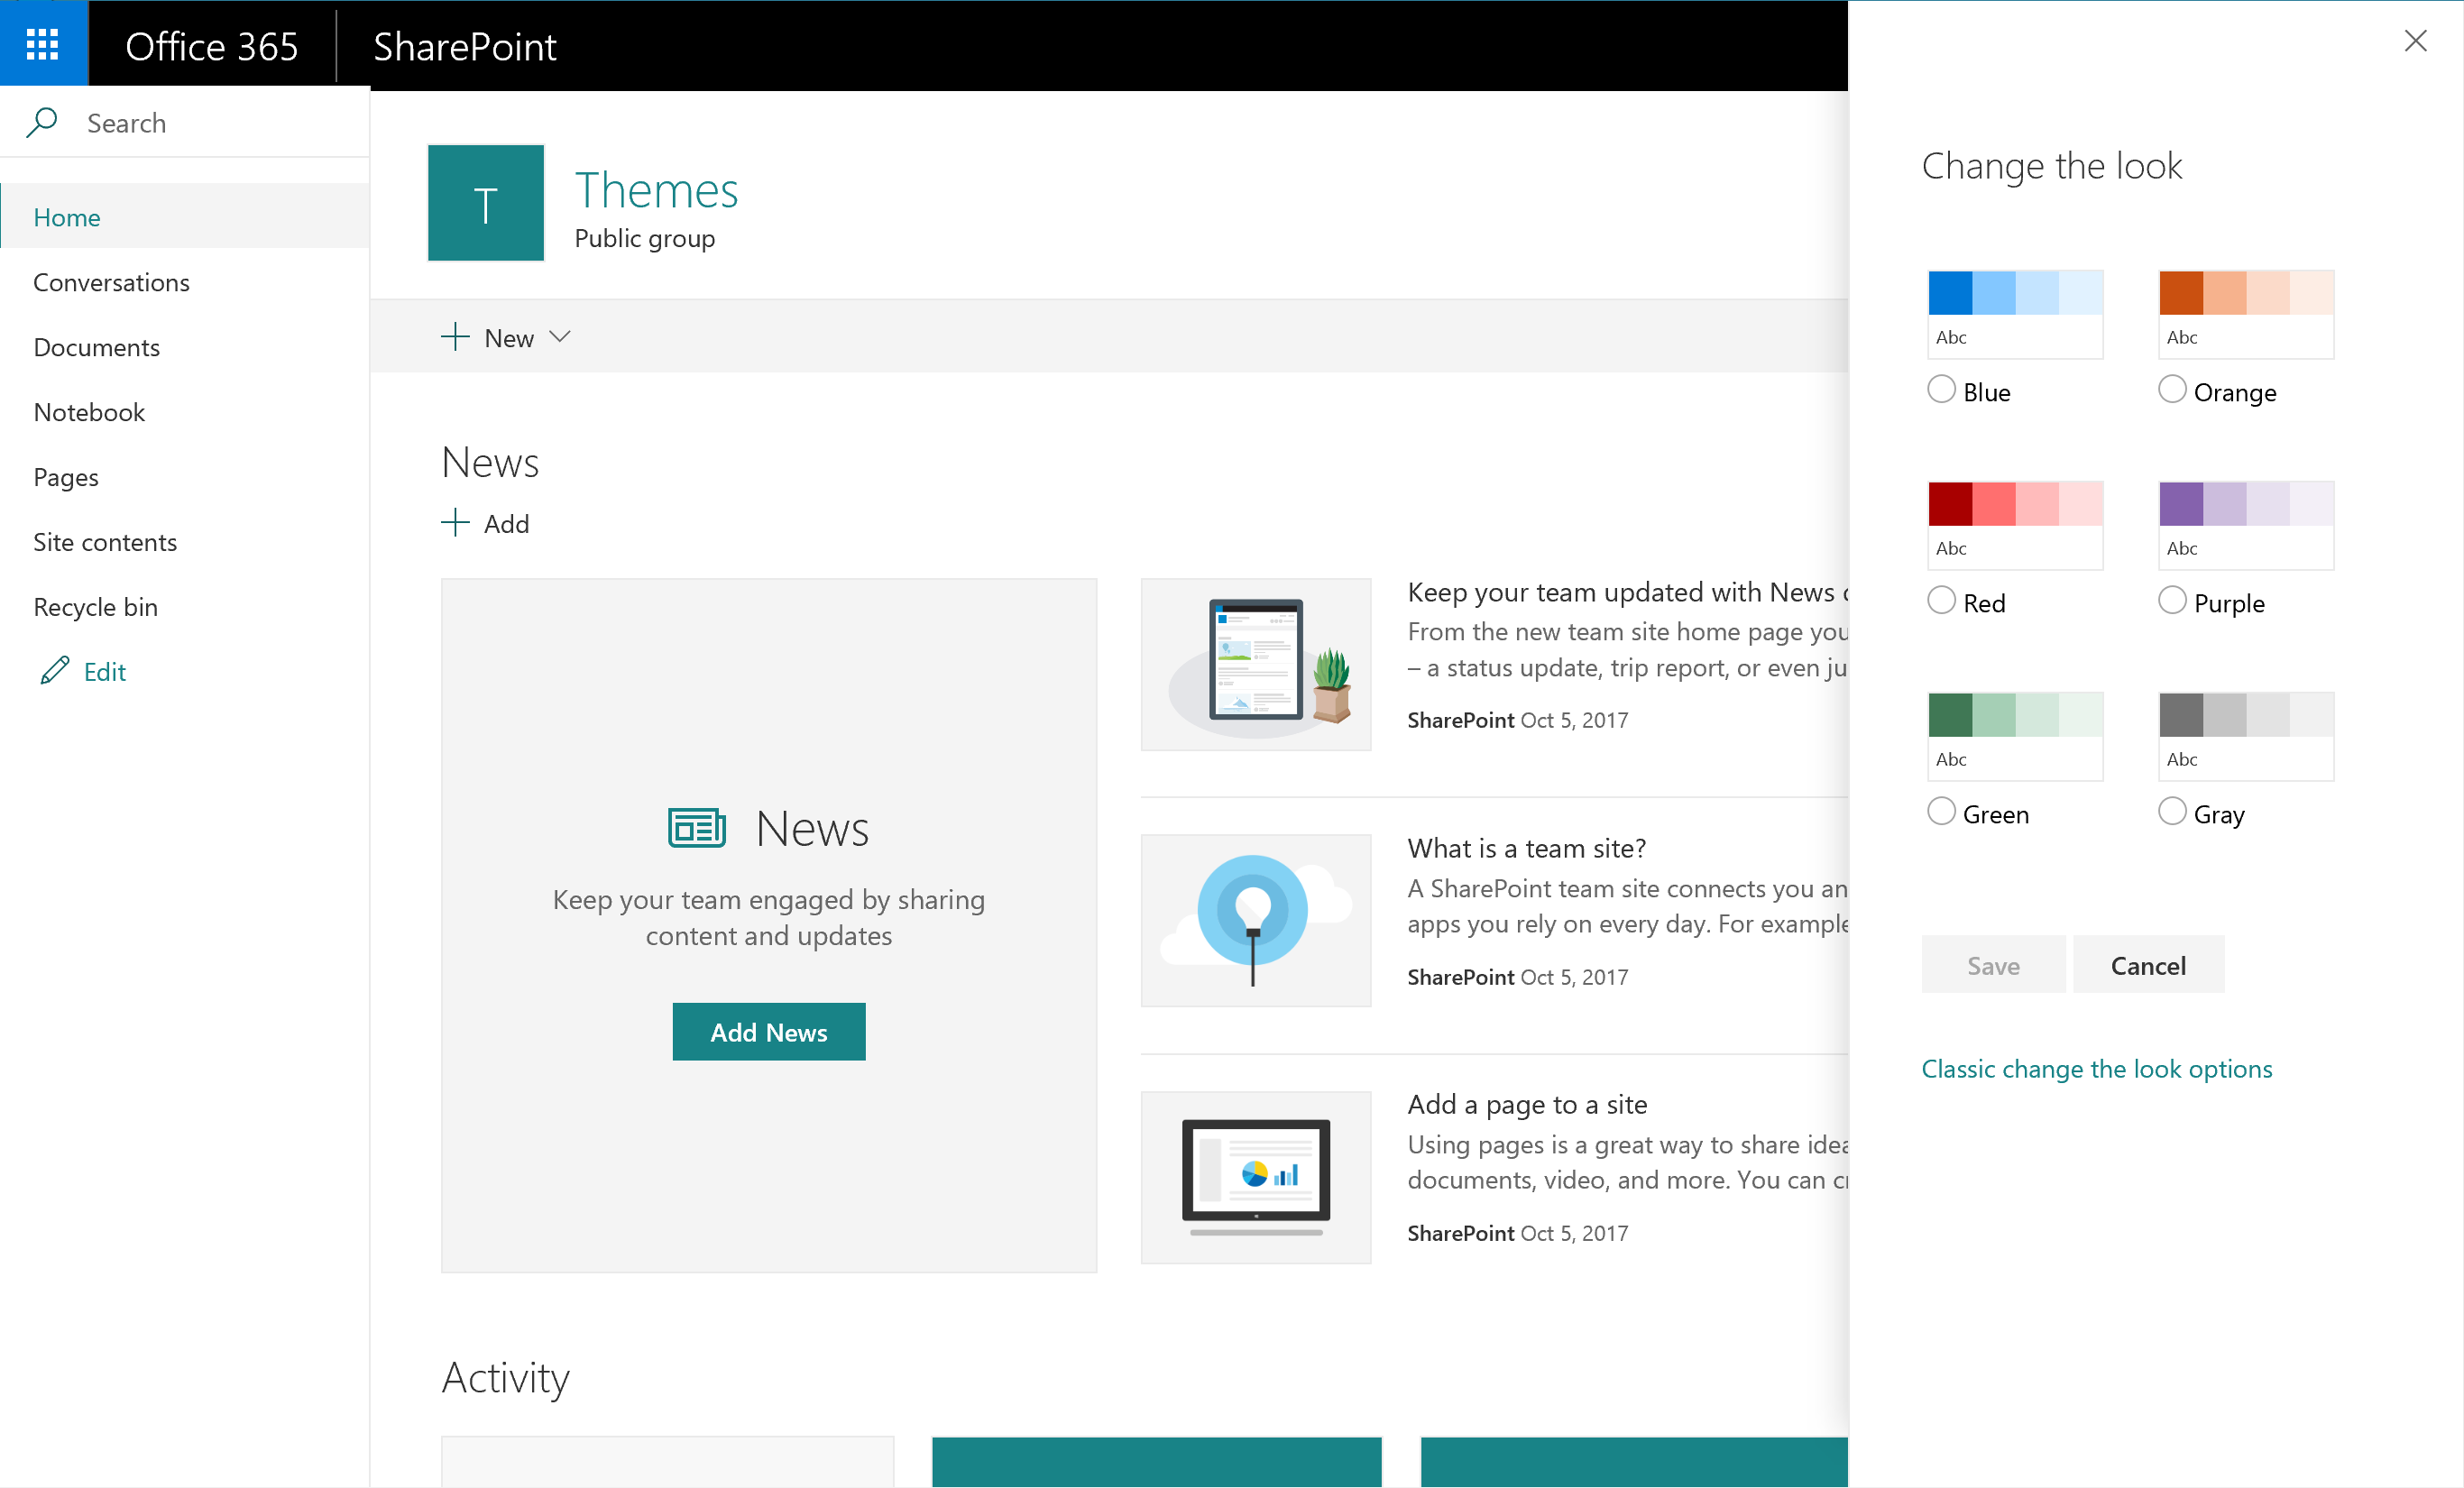 Theme in Office 365 Group